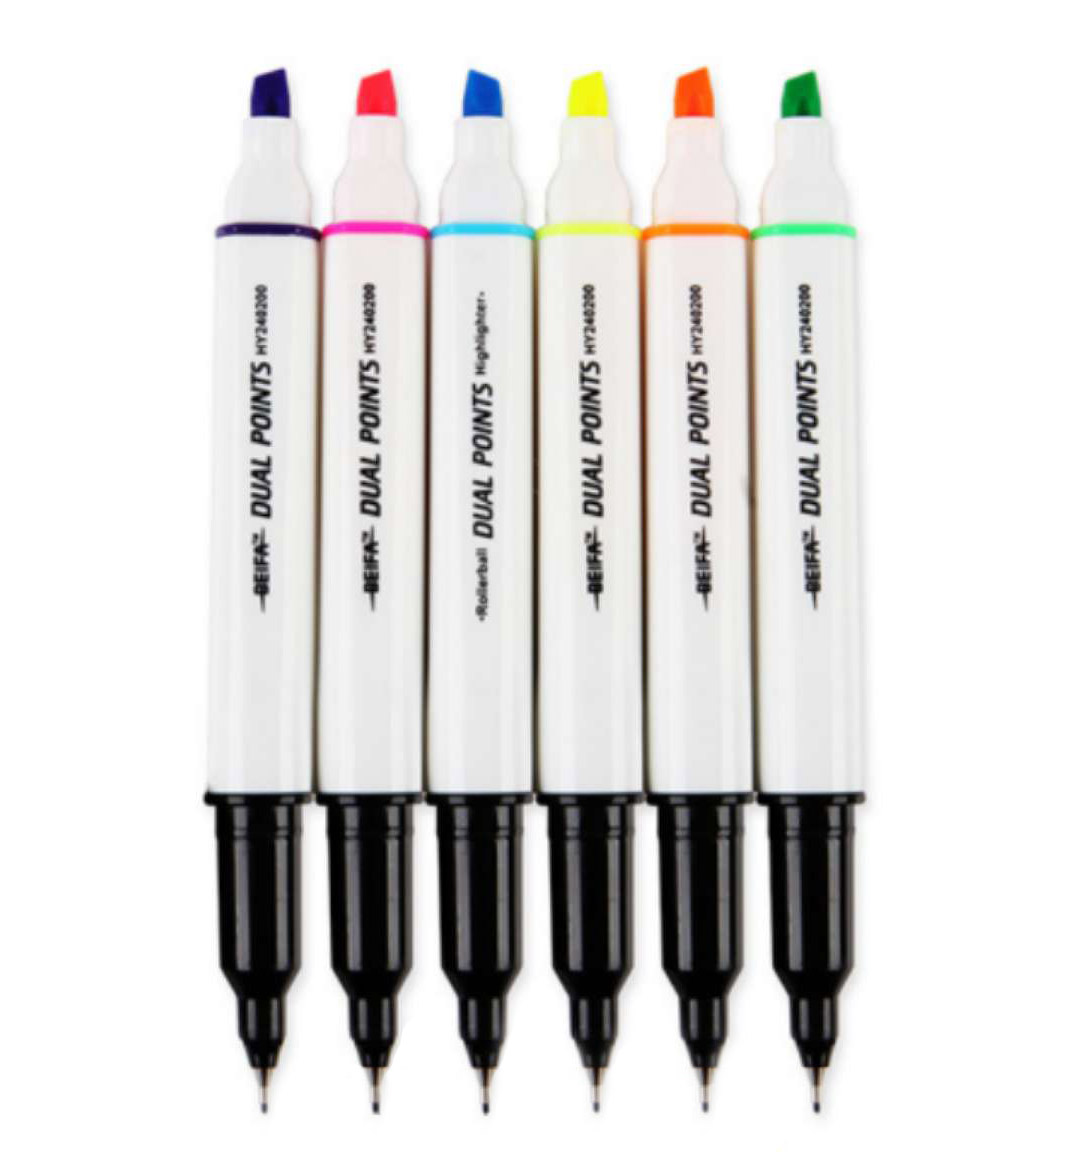 2-in-1 Dual Tip Gel Pen and Highlighter - Colors